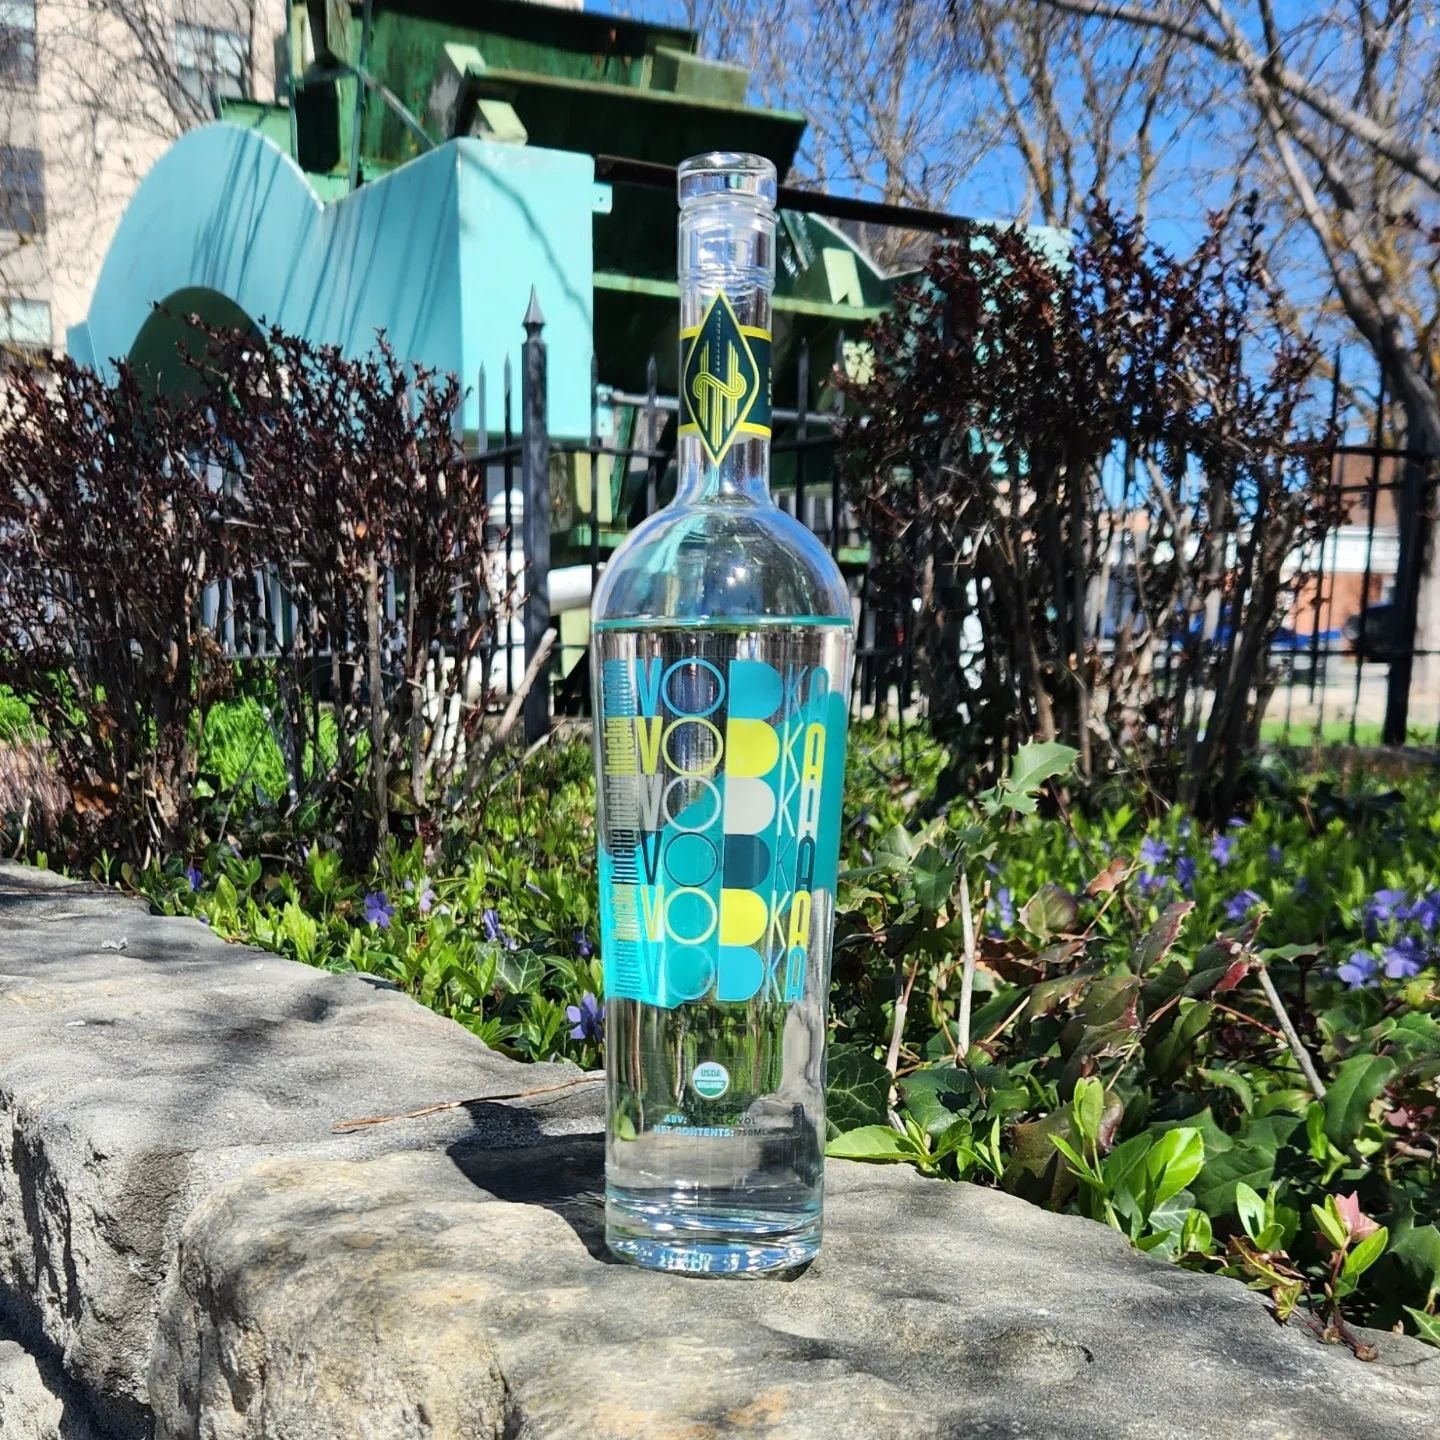 Our locally crafted vodka can be found in stores across the Capitol City! Sip on the spirit of Idaho with every smooth pour. Cheers to supporting local and enjoying the purest vodka right from our own backyard!
#idahospirits #madeinidaho #boise #smal